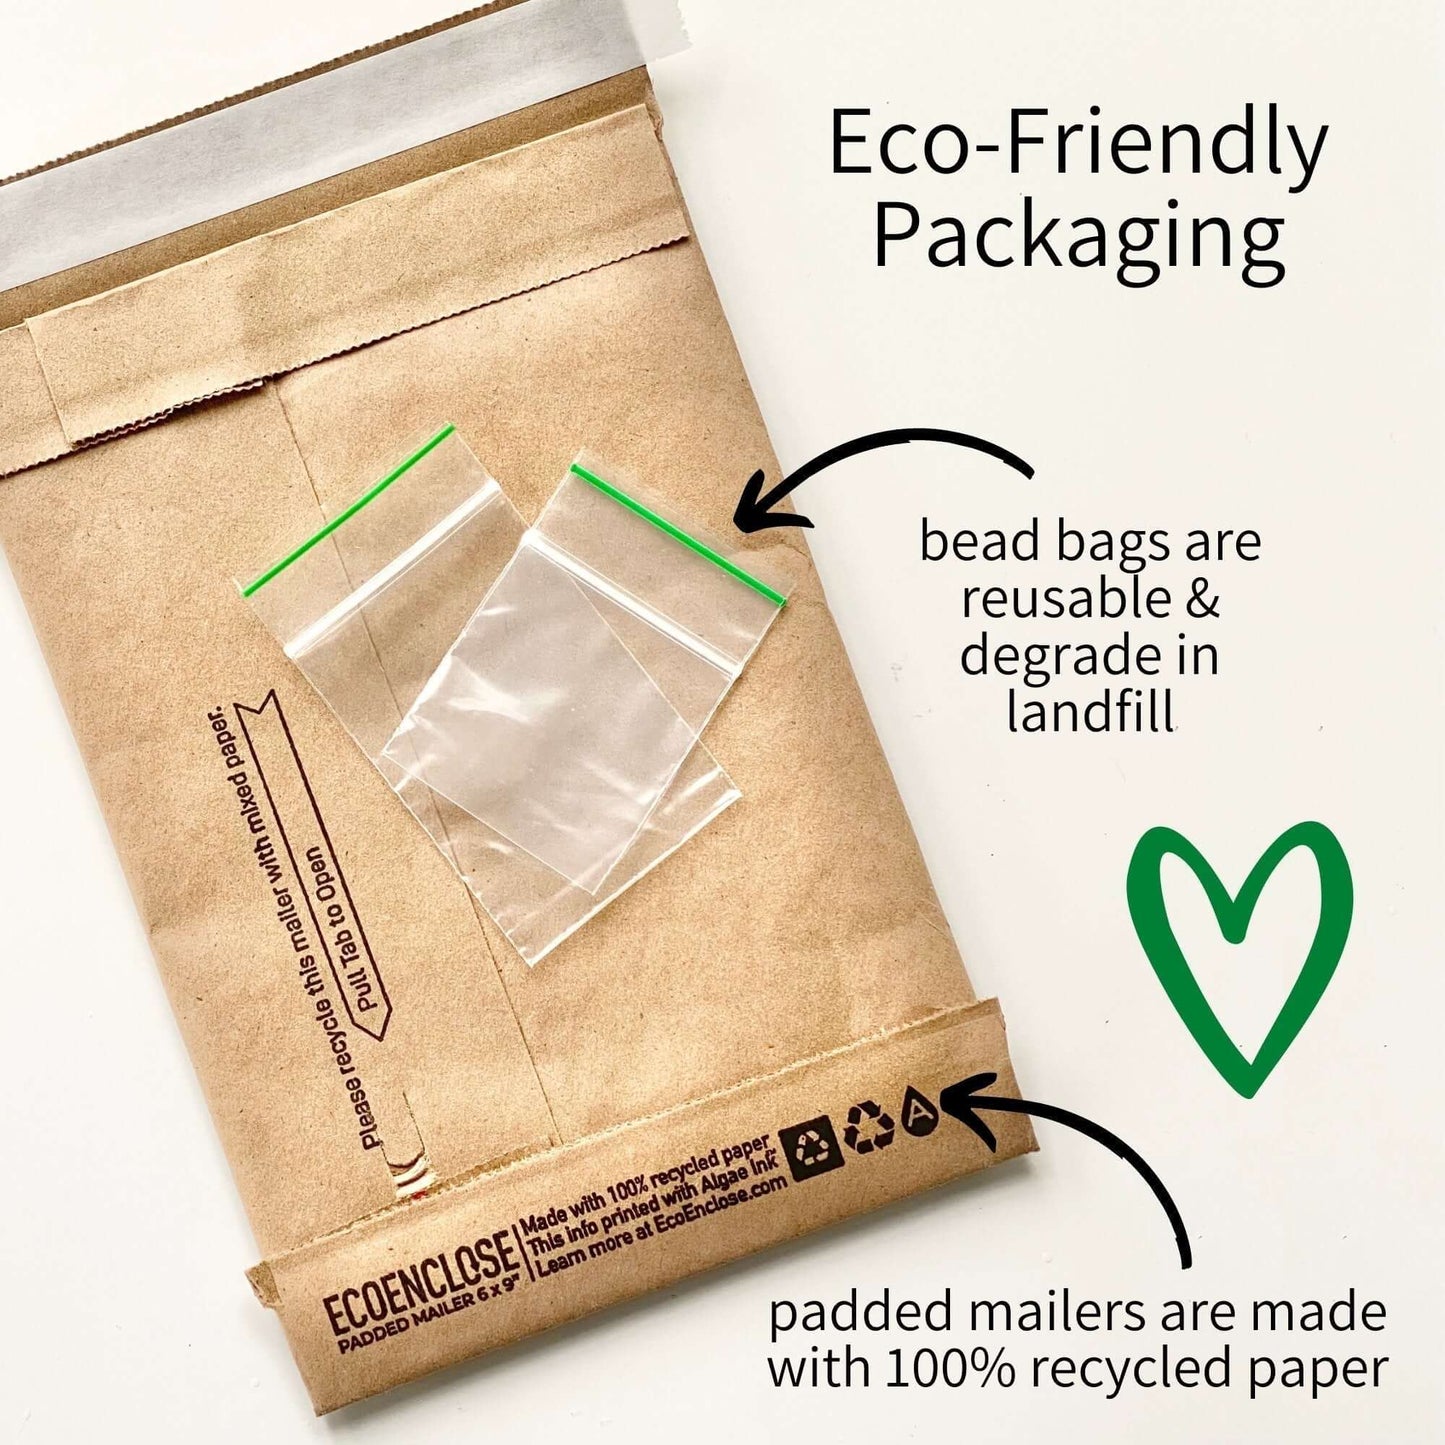 Eco-friendly recycled paper padded mailed and degradable plastic baggies used by The Bead Mix to package and ship beads.